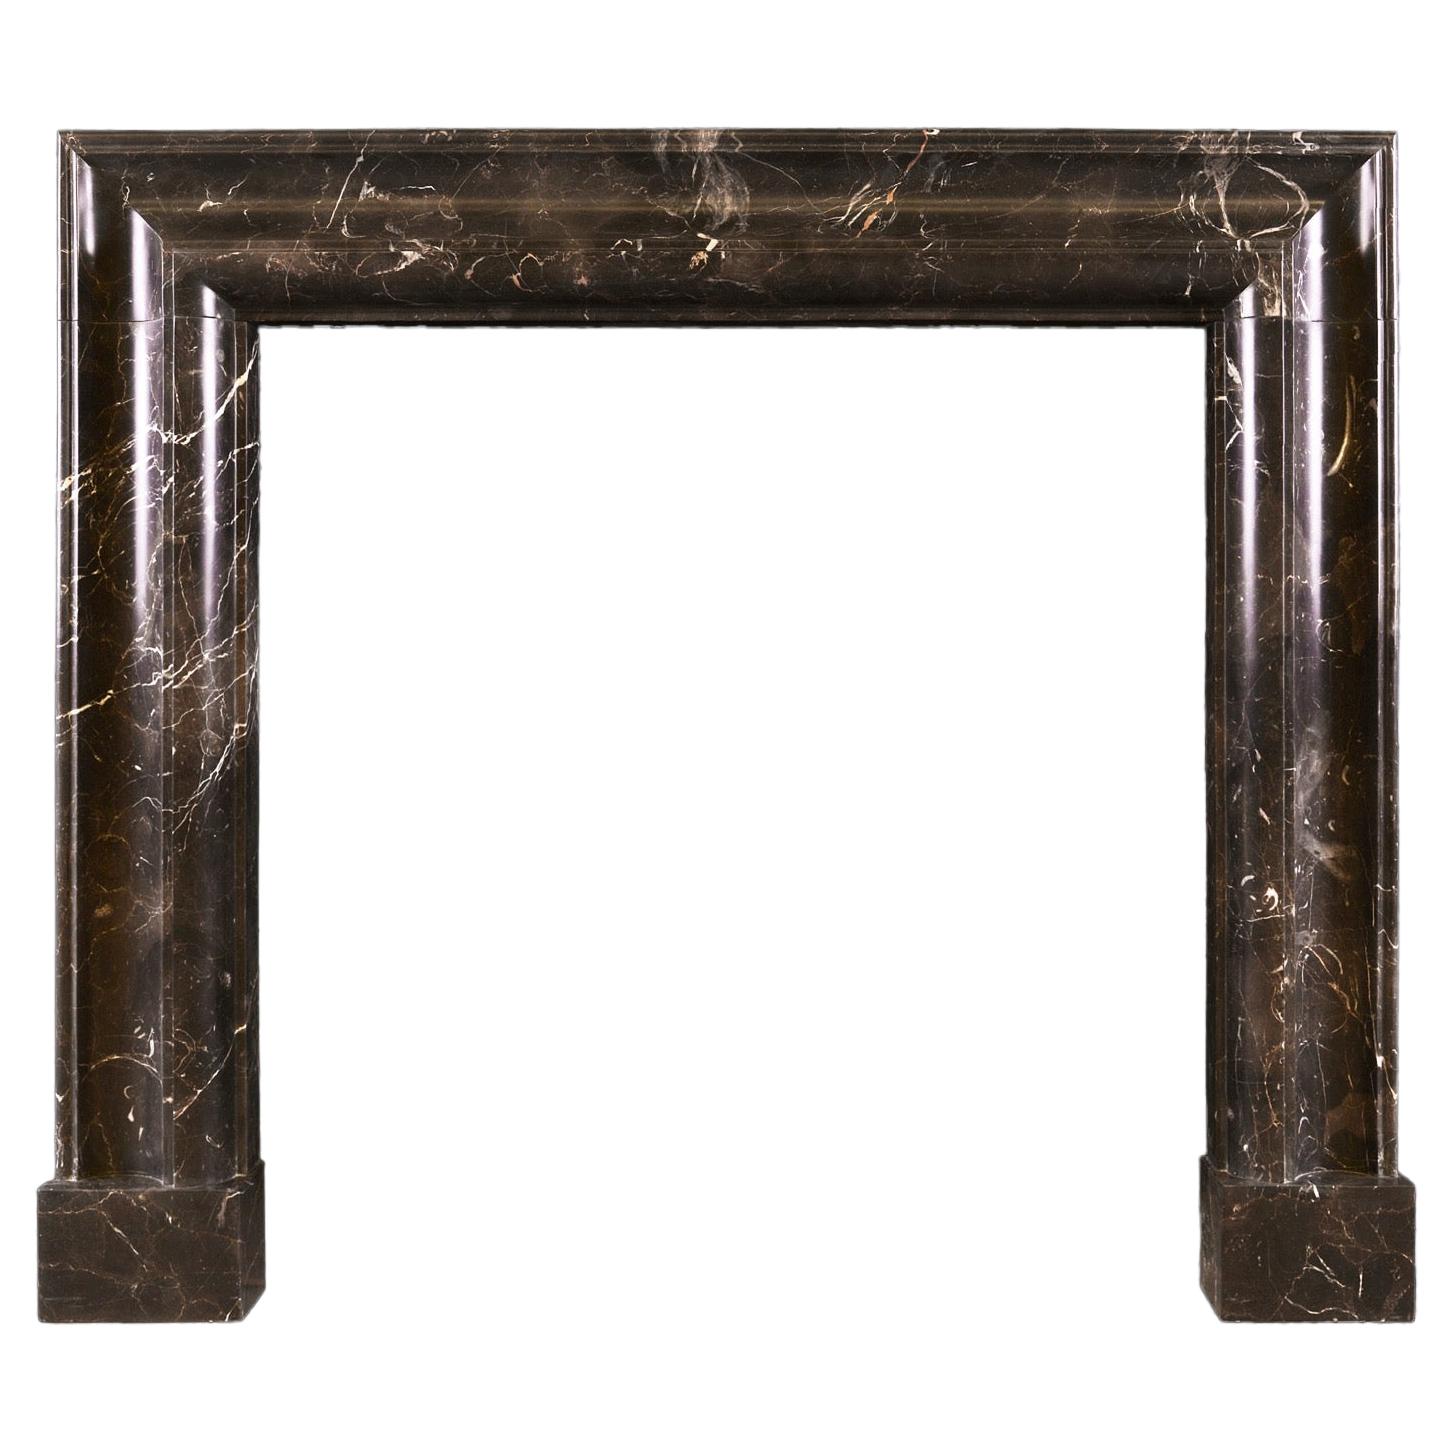 Unusually Shaped English Bolection Moulded Fireplace in Dark Emperador Marble